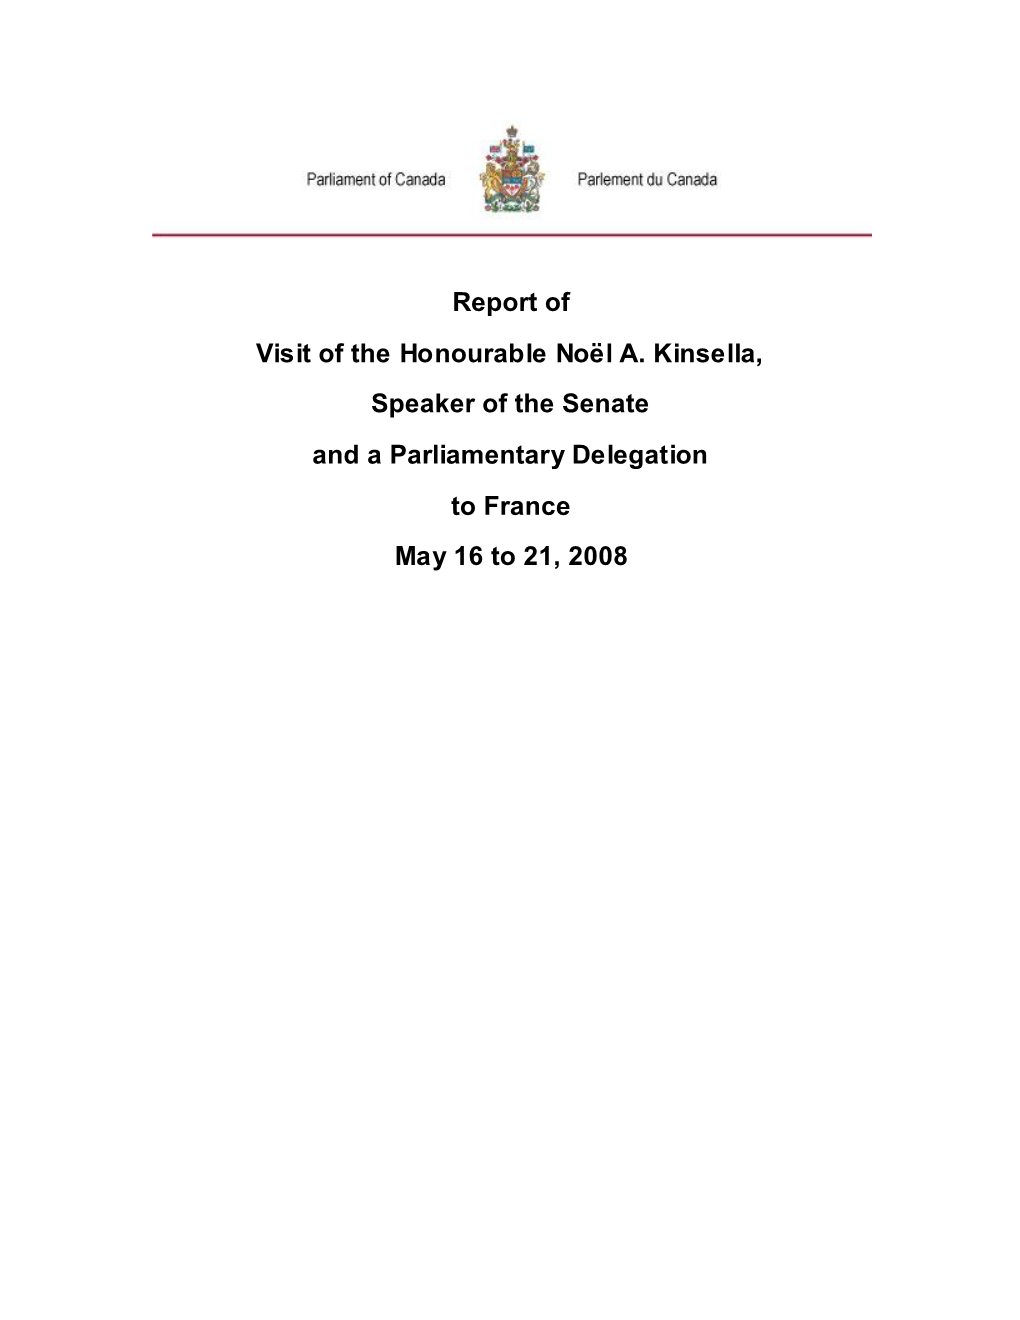 Report of Visit of the Honourable Noël A. Kinsella, Speaker of the Senate and a Parliamentary Delegation to France May 16 to 21, 2008